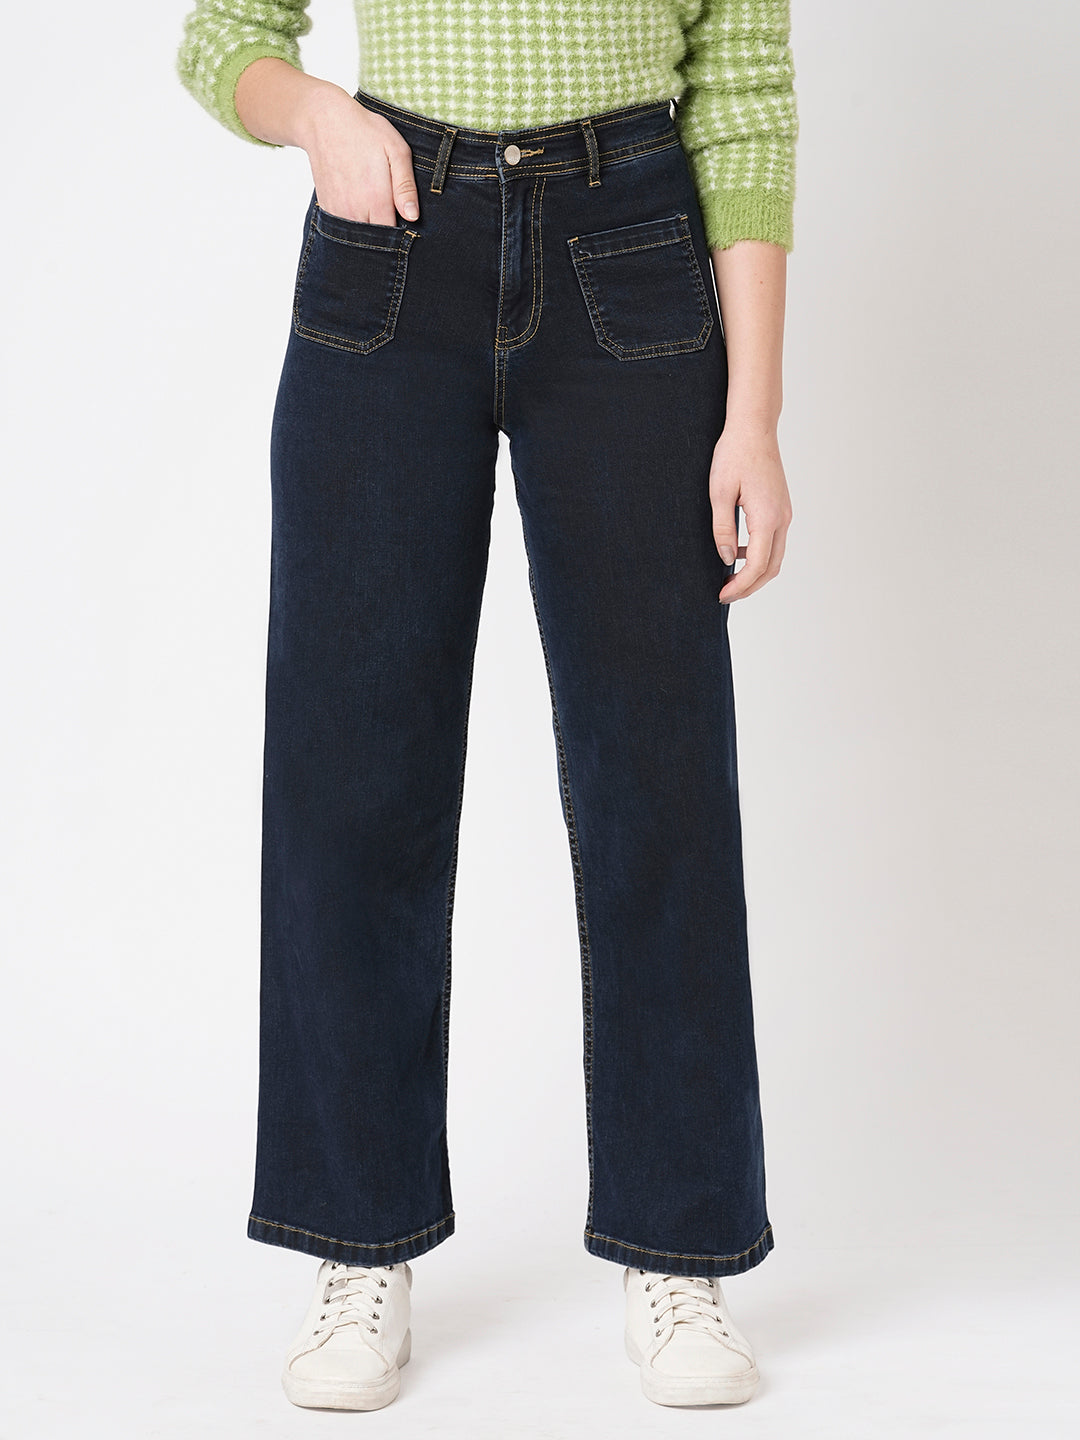 Buy WOMEN DENIM NAVY BLUE JEANS Online in Pakistan On  at Lowest  Prices